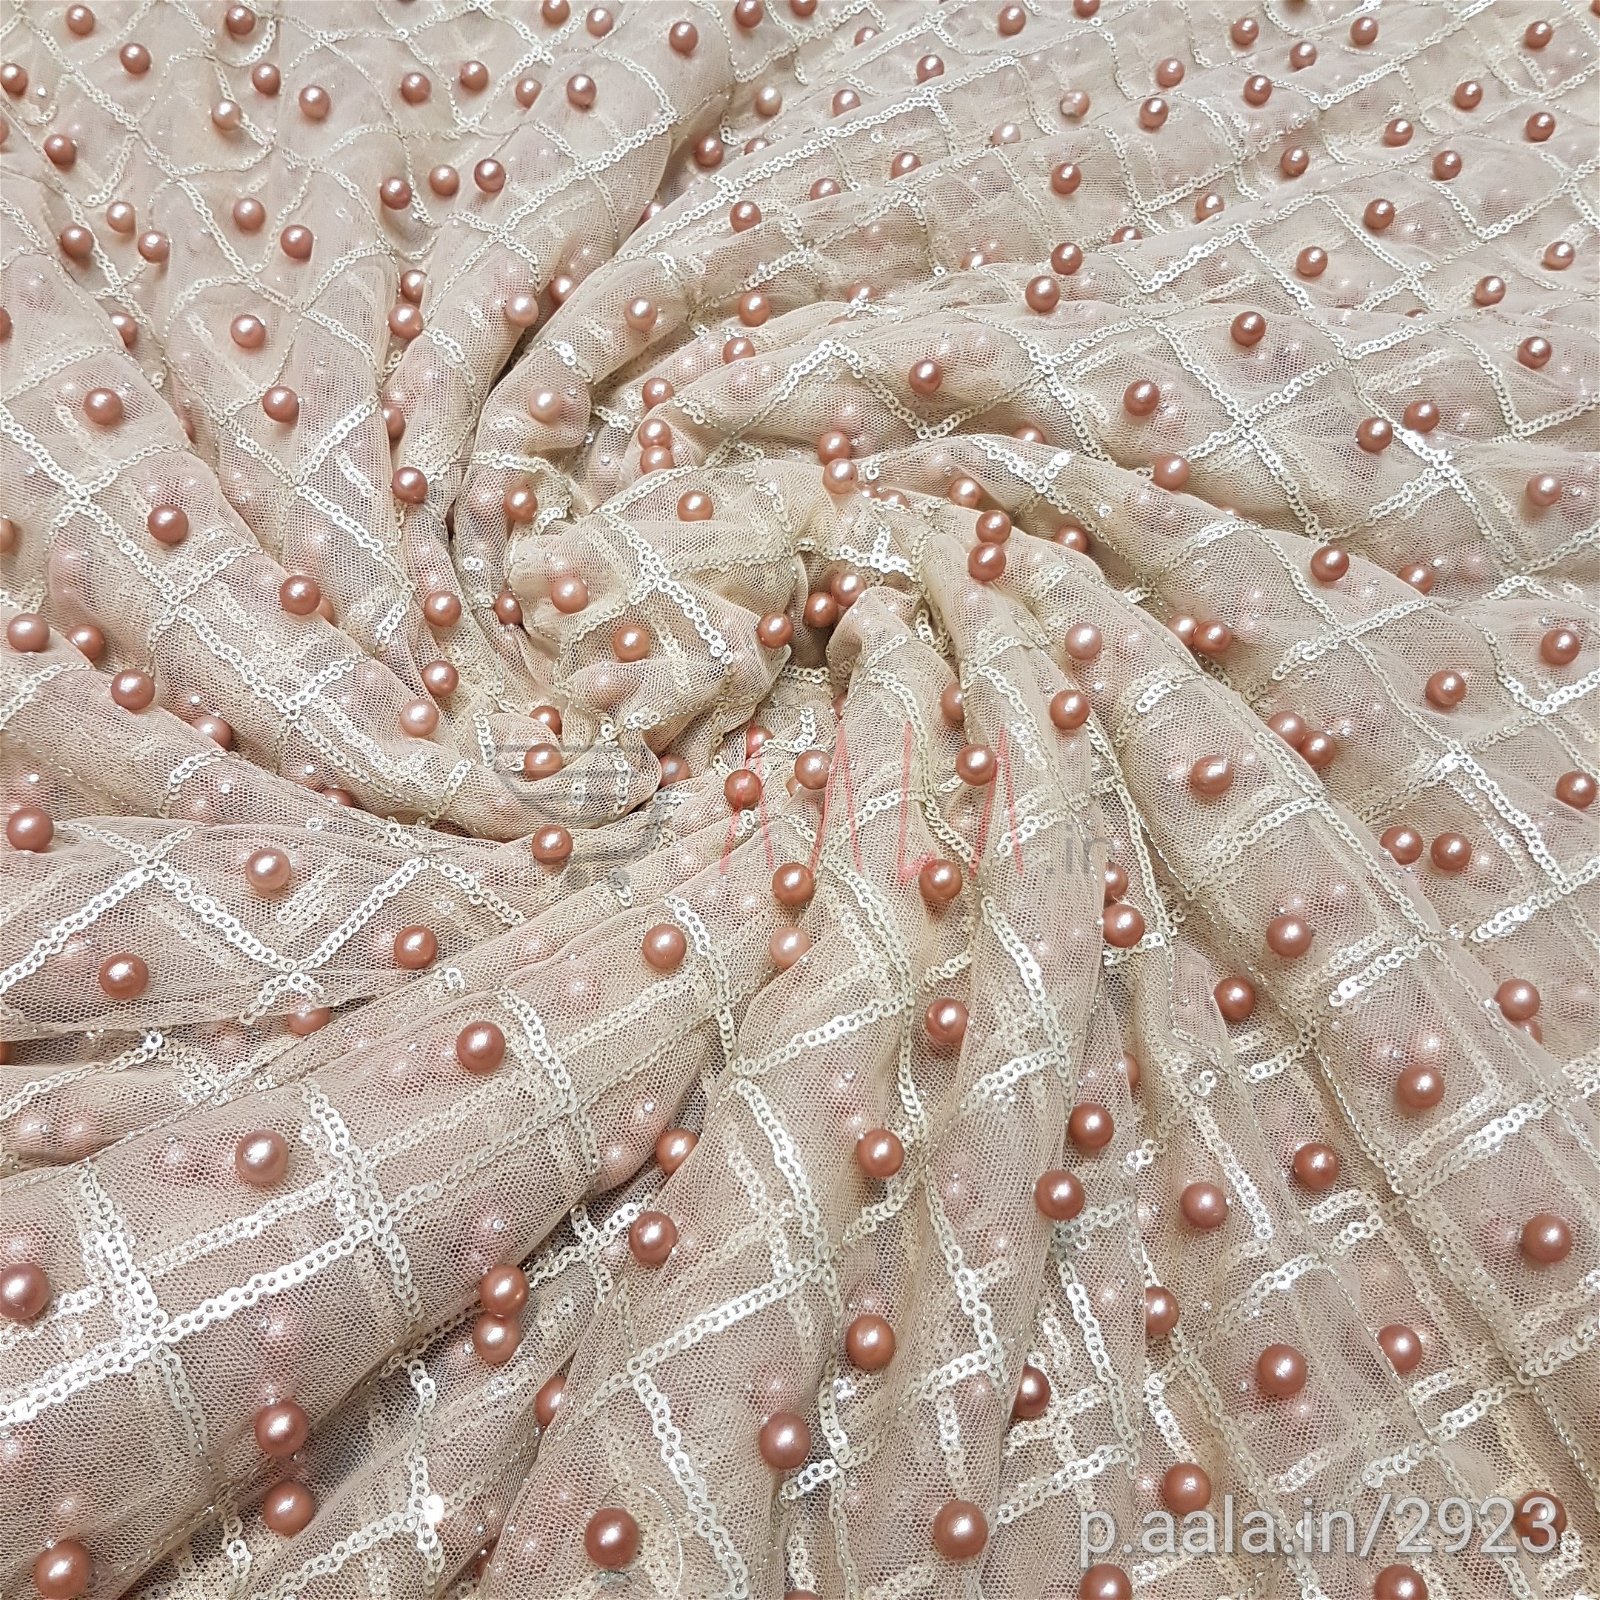 Pearl Net Nylon 44 Inches Dyed Per Metre #2923